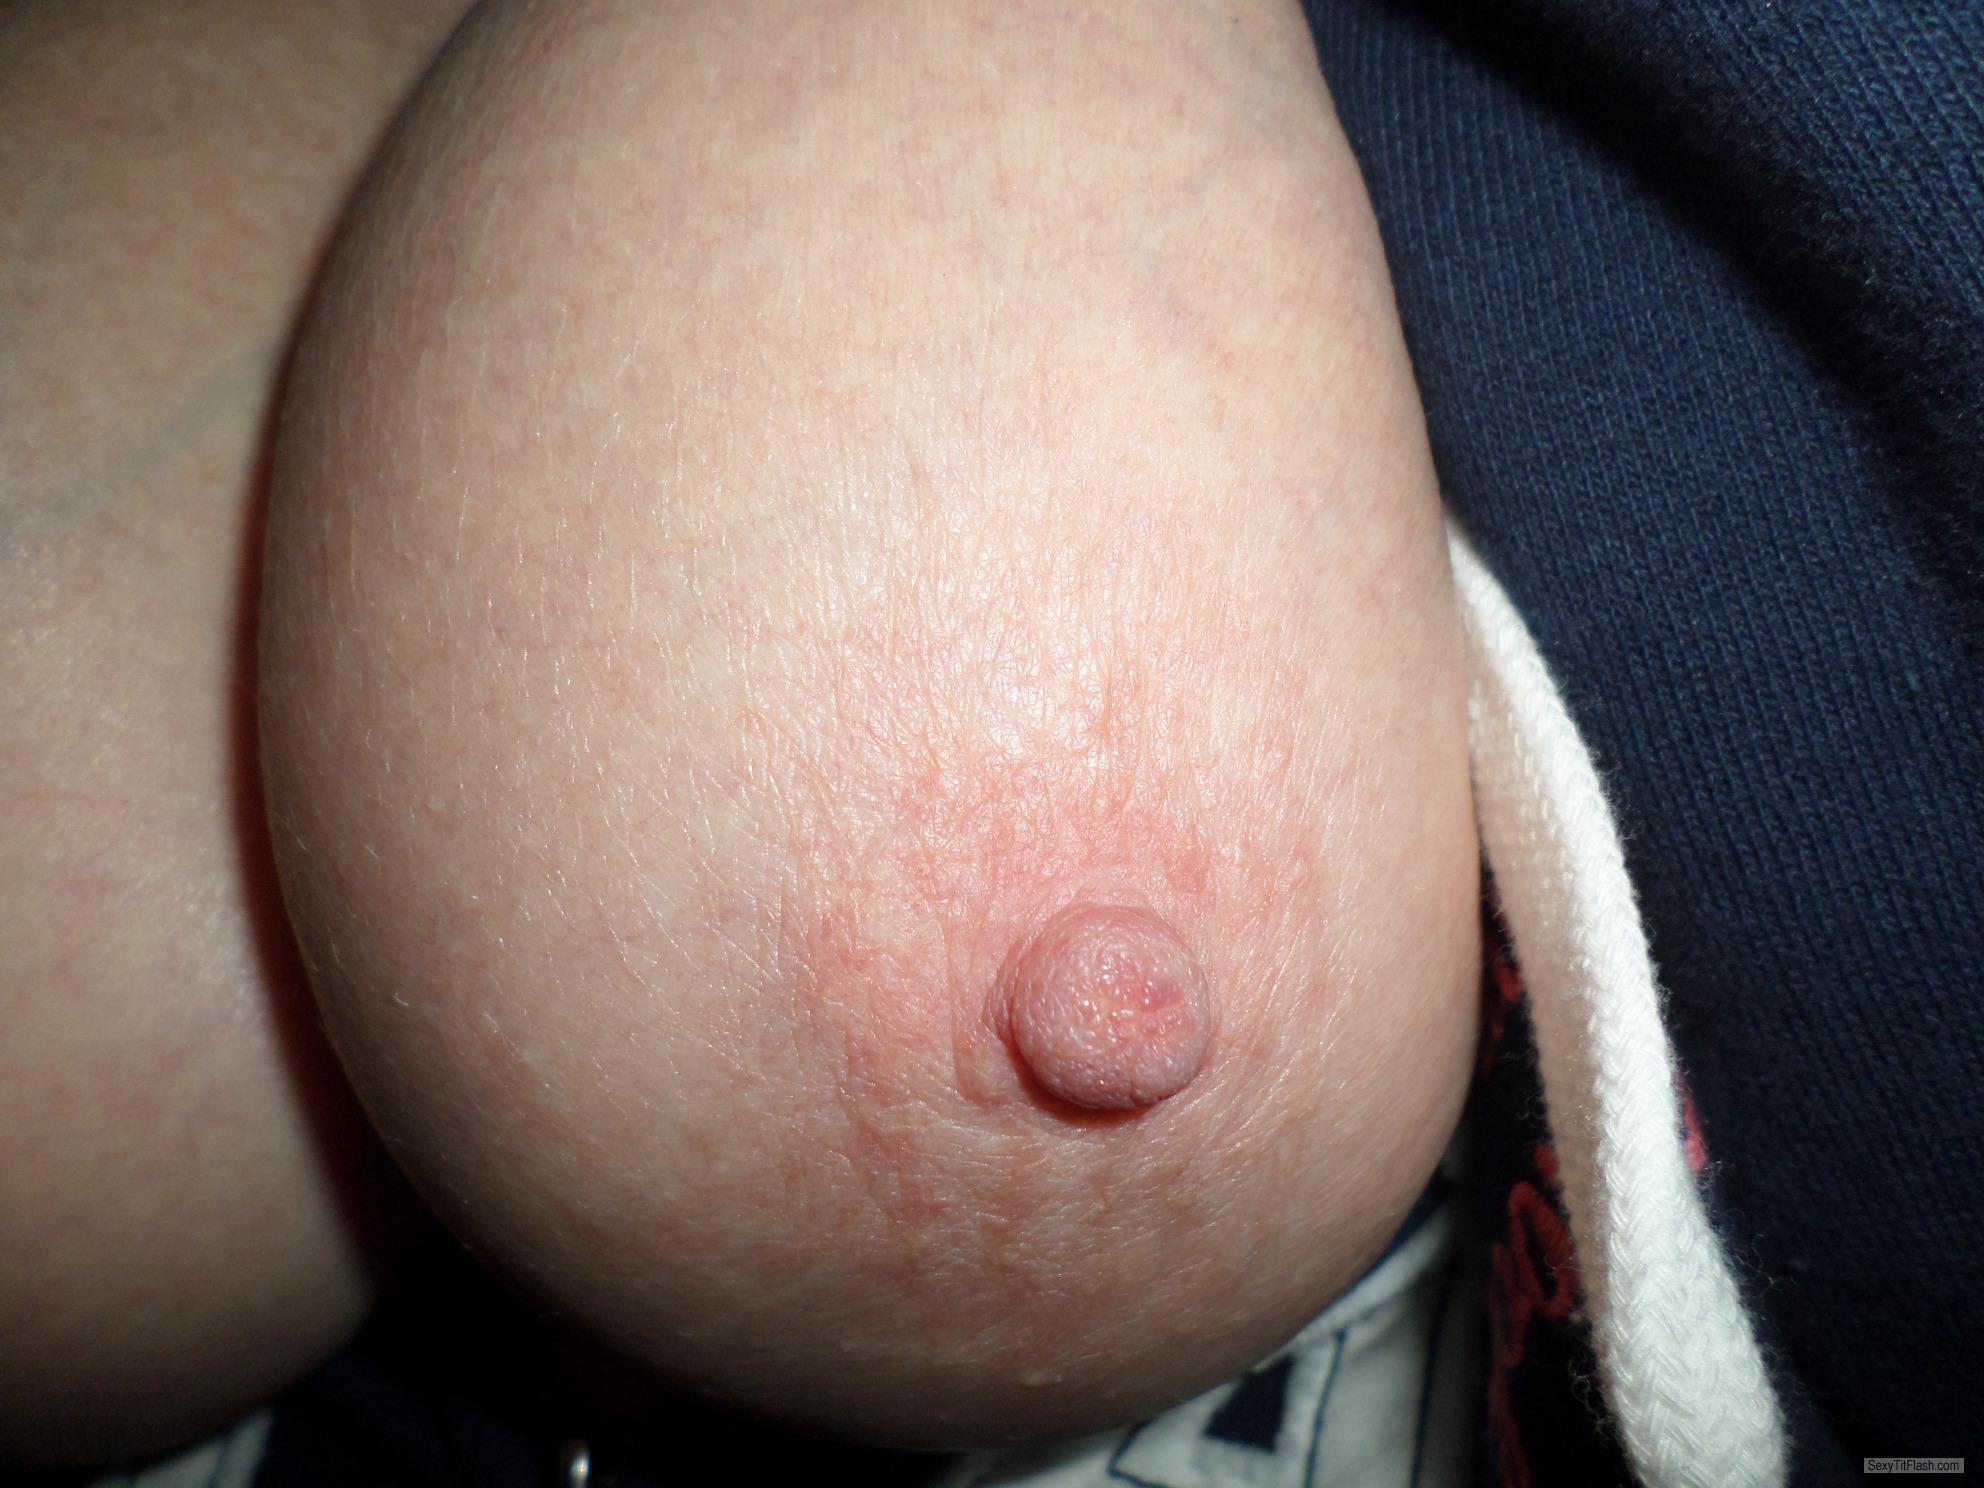 Tit Flash: My Extremely Big Tits - Horny 1 from United Kingdom